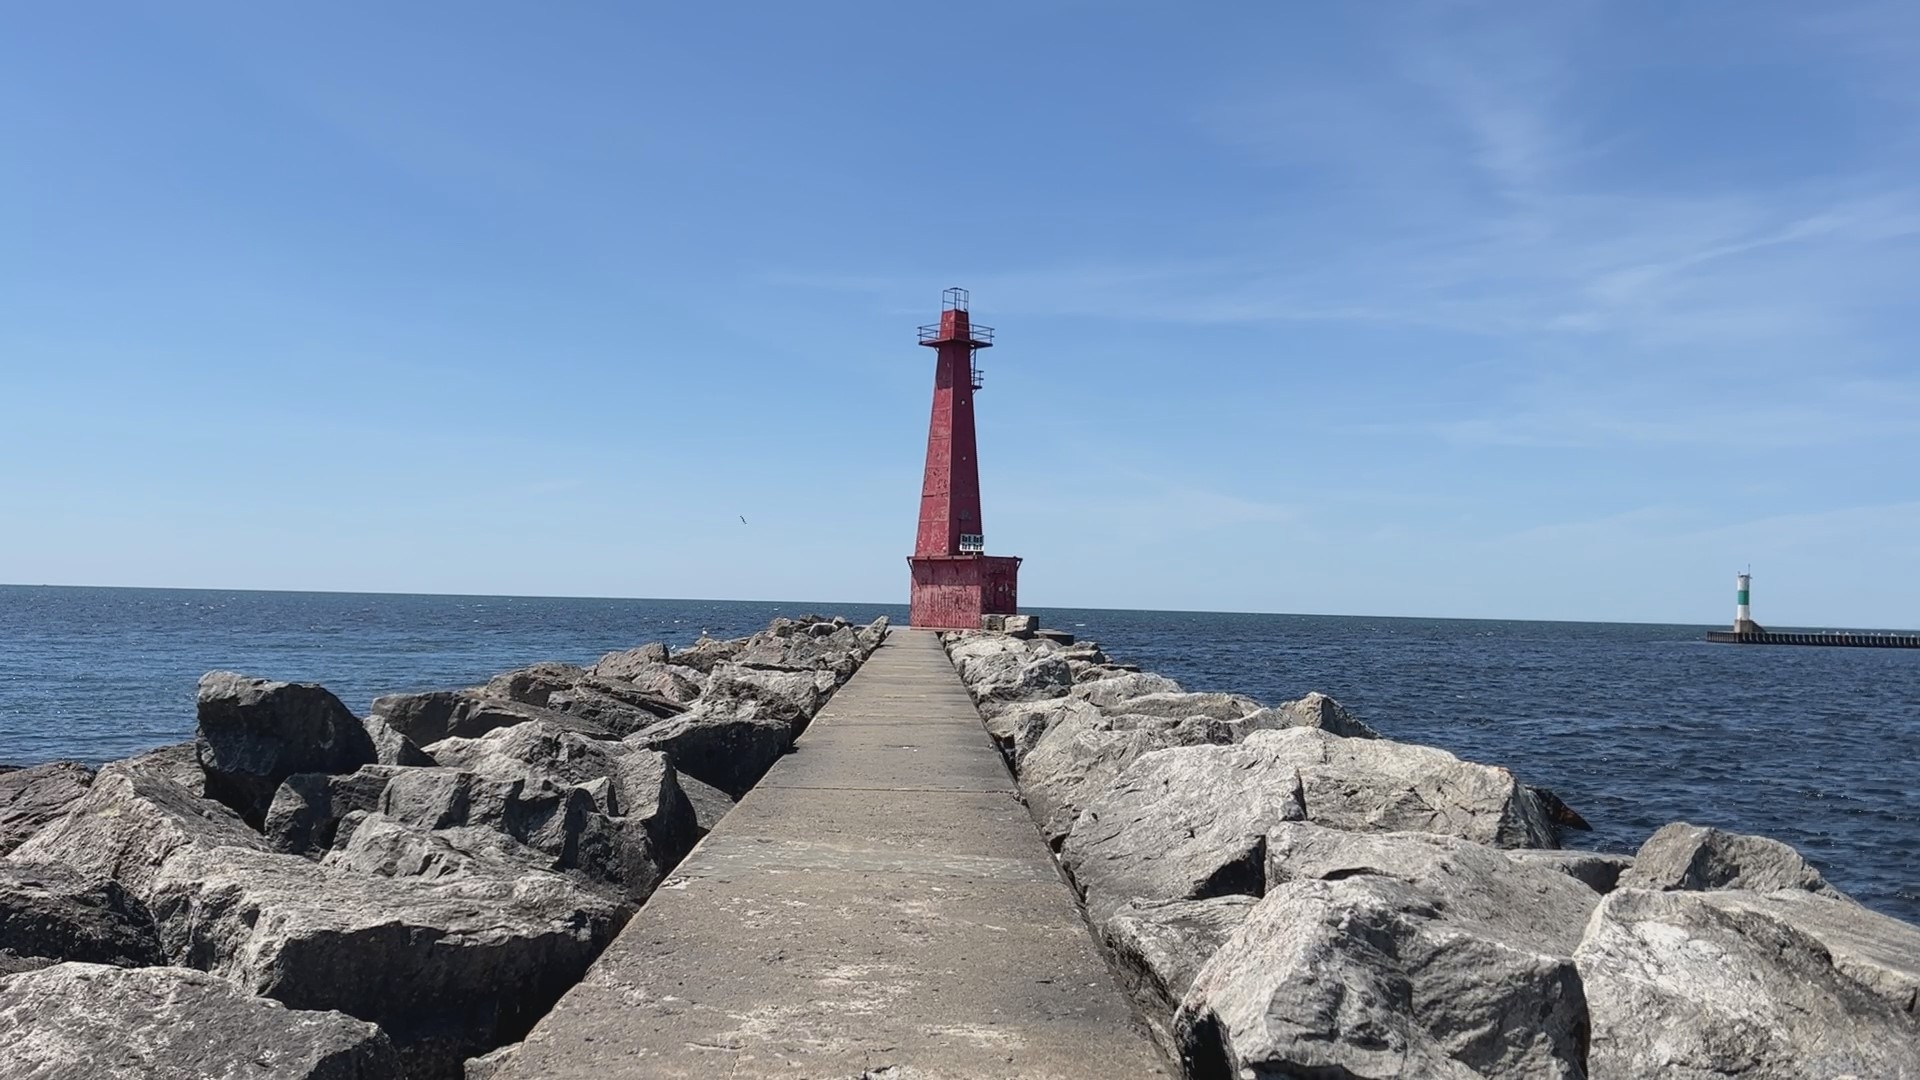 As they have for years, tours of one of the Lake Michigan shoreline’s most famous lighthouses, built around a century ago, open for the summer season on Monday.